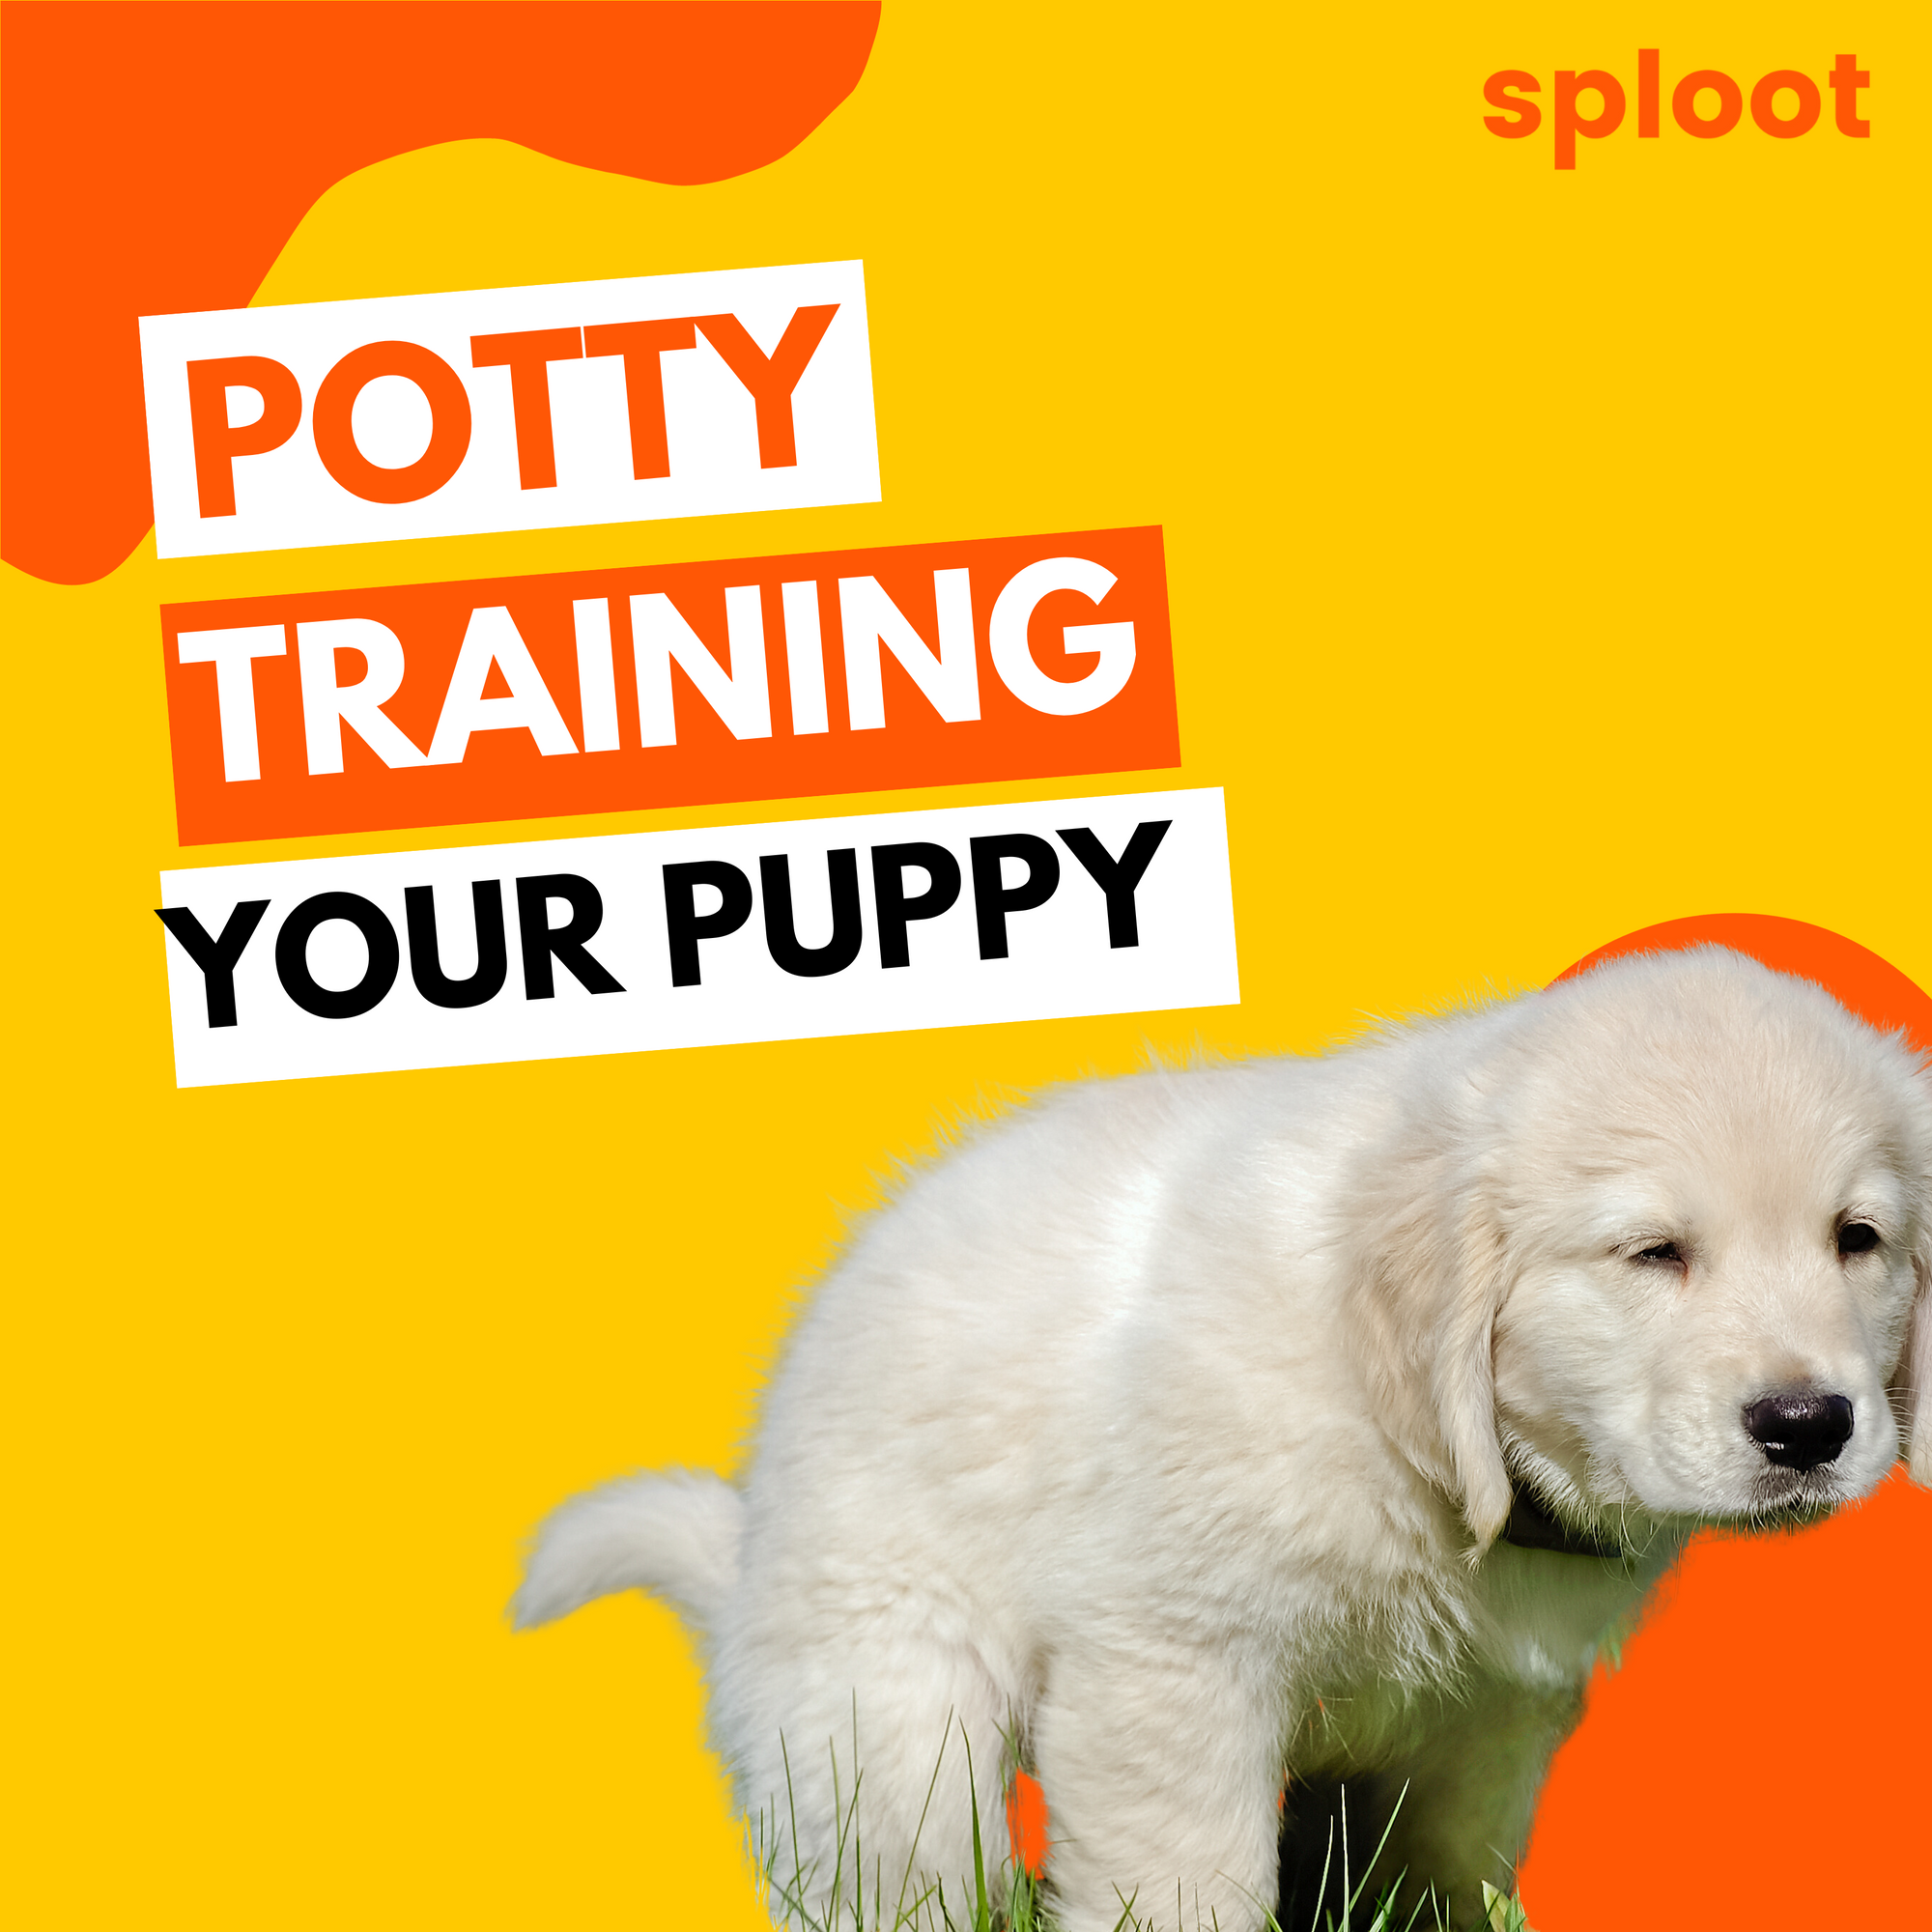 7 Easy Steps To Potty Train Your Puppy In 7 Days